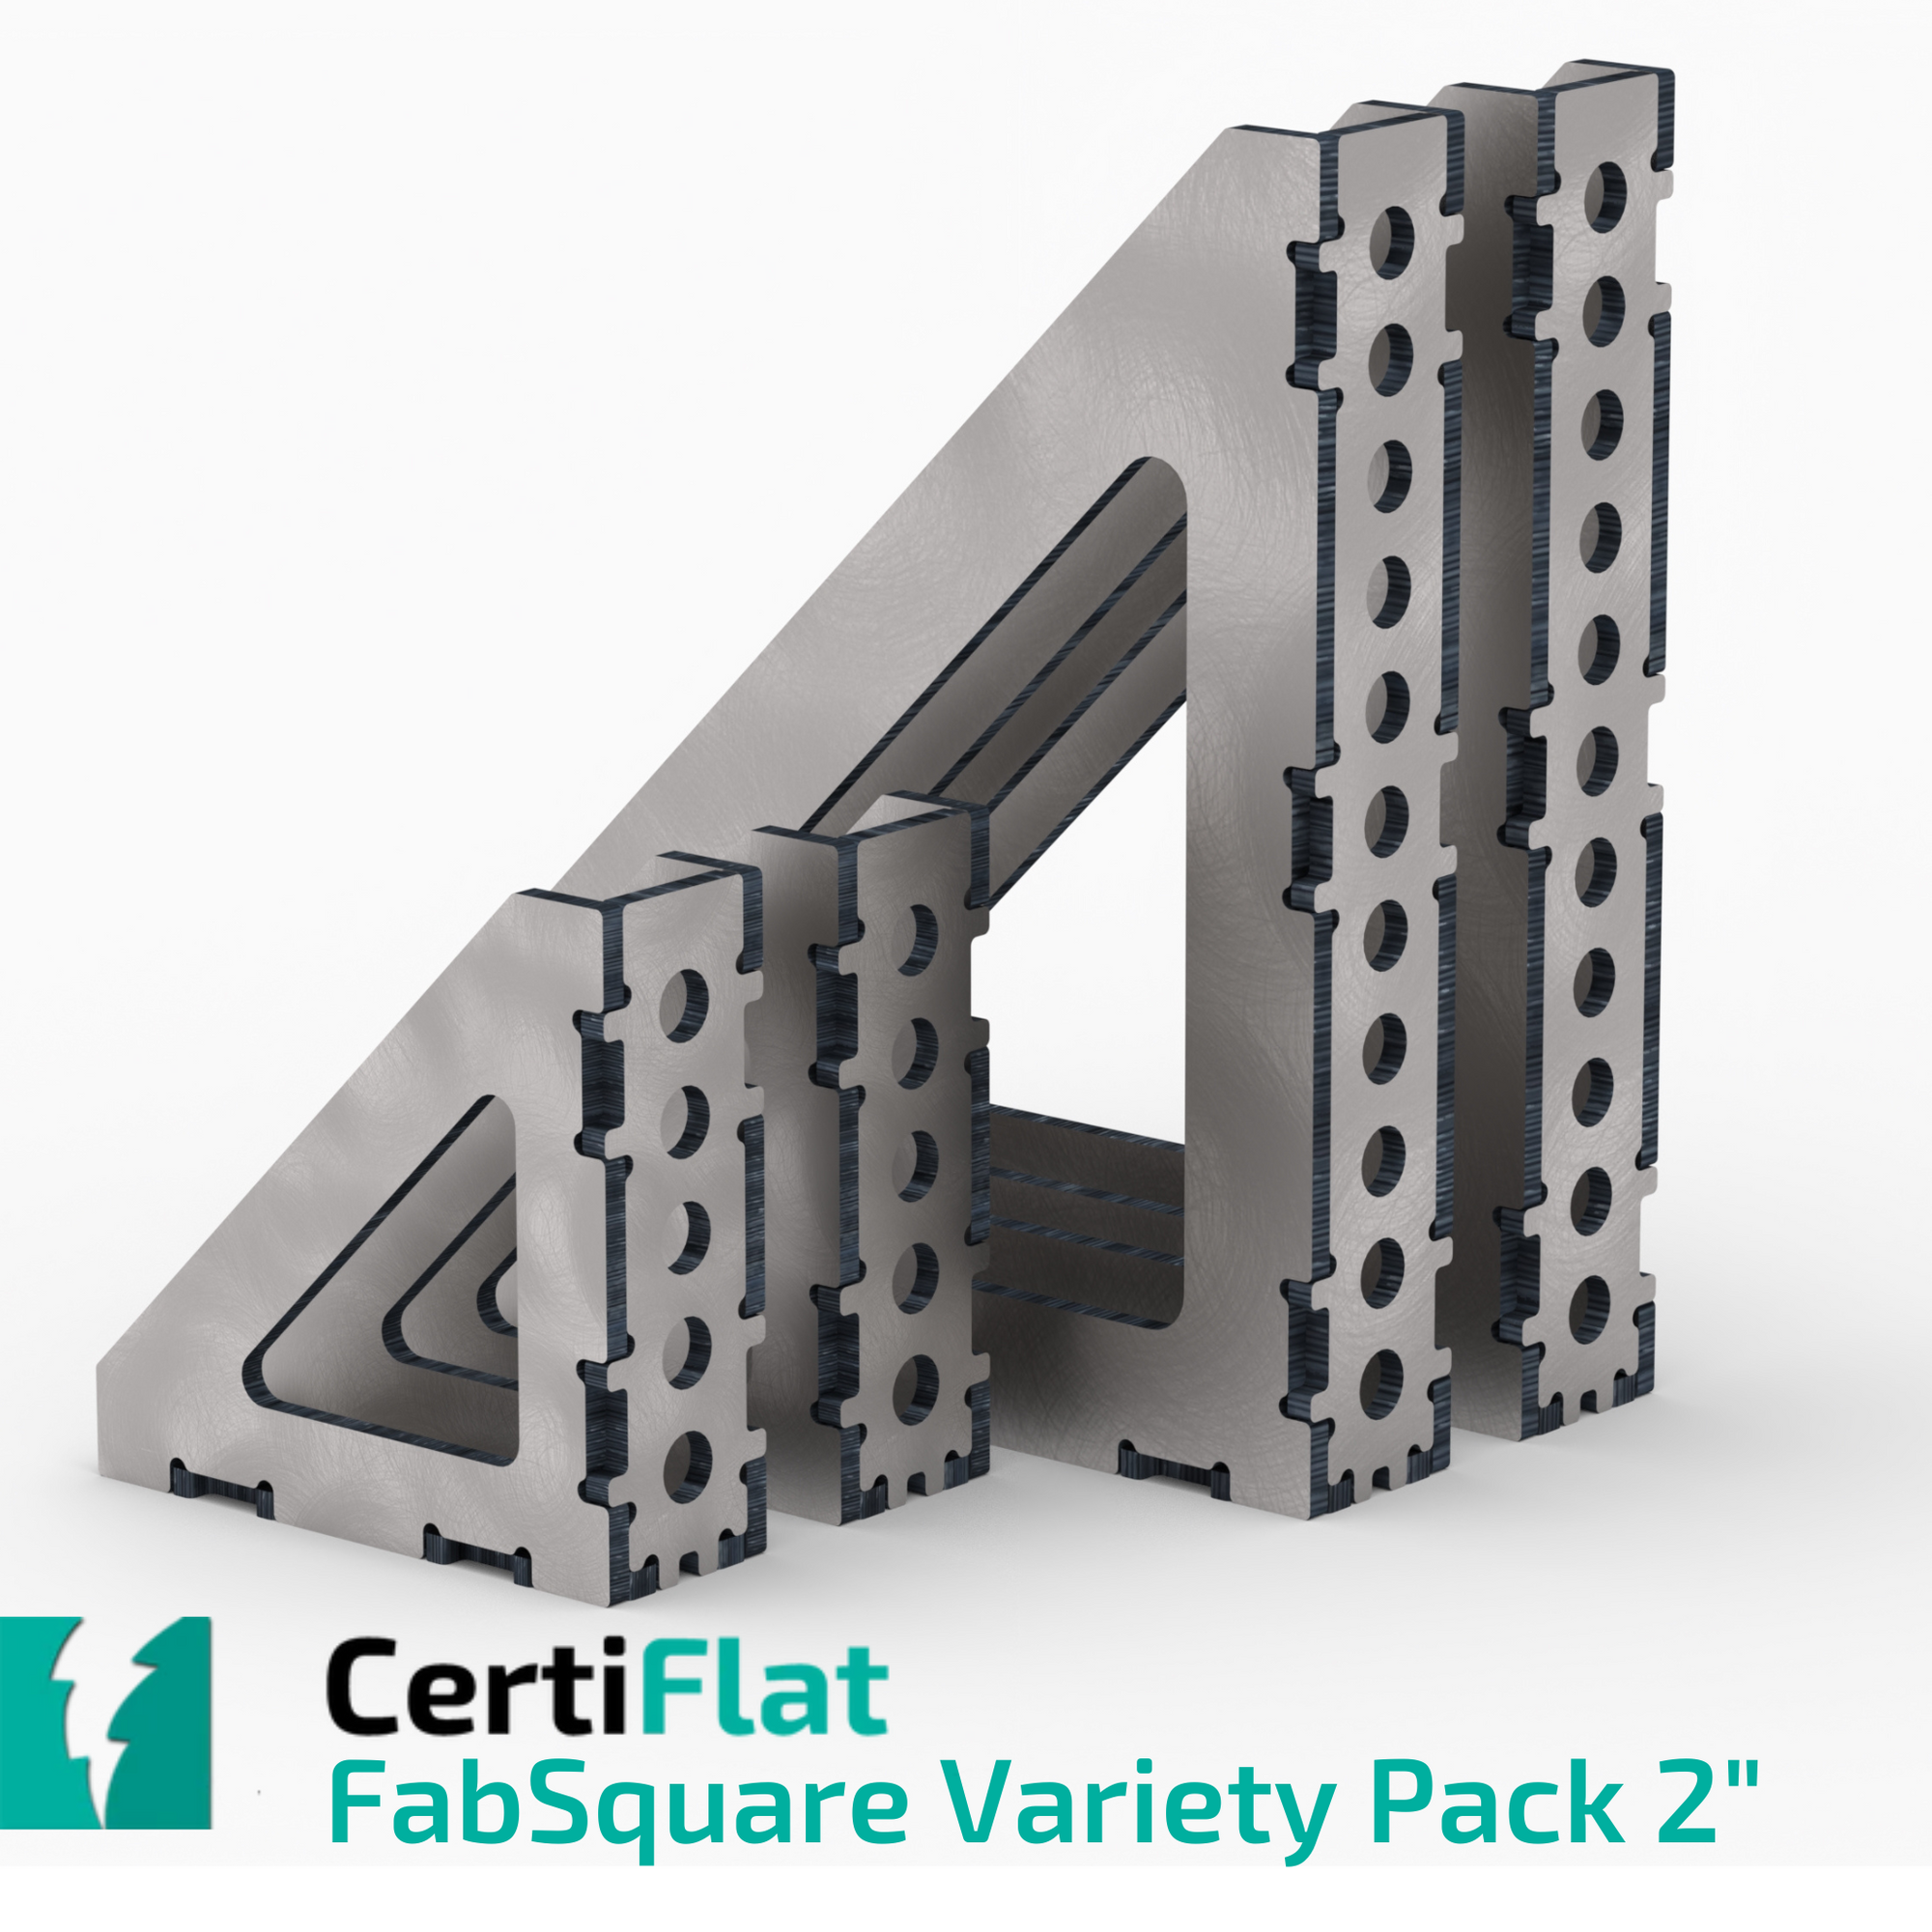 CertiFlat FabSquare Variety FabSquare 2" Pack - VFS2